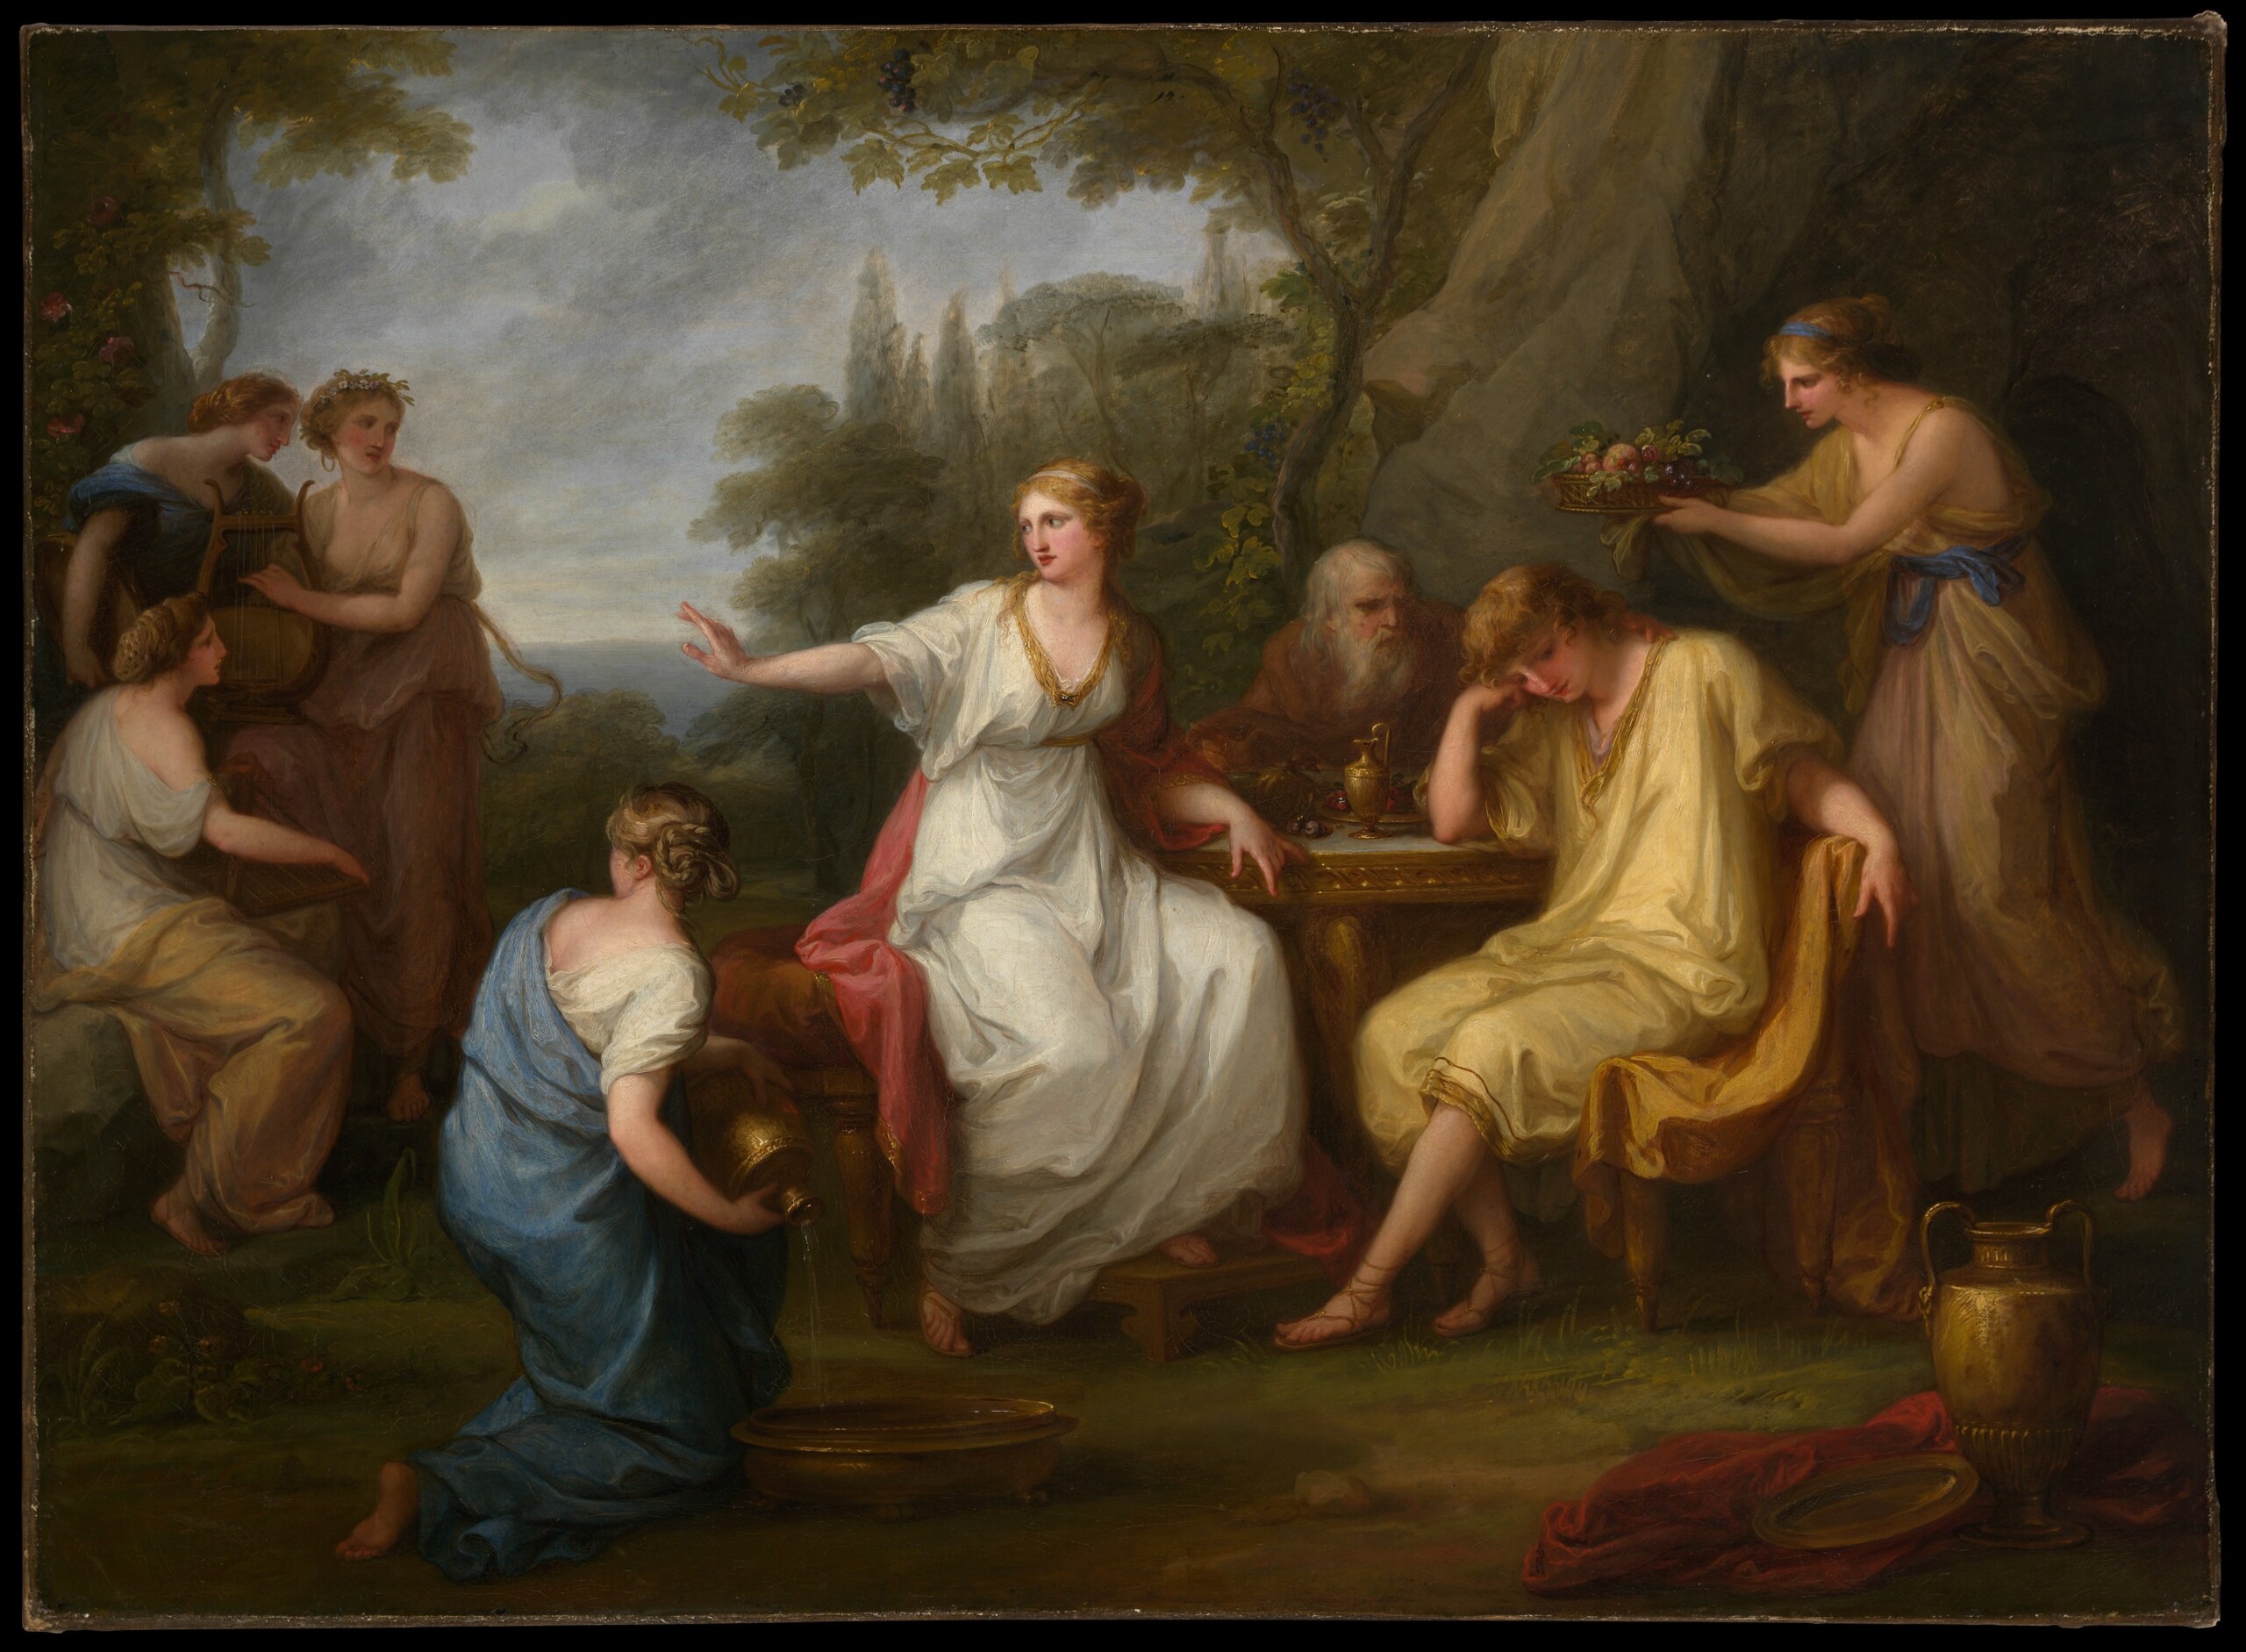 the story of Angelica Kauffman, one of the prized painters of the 18th century